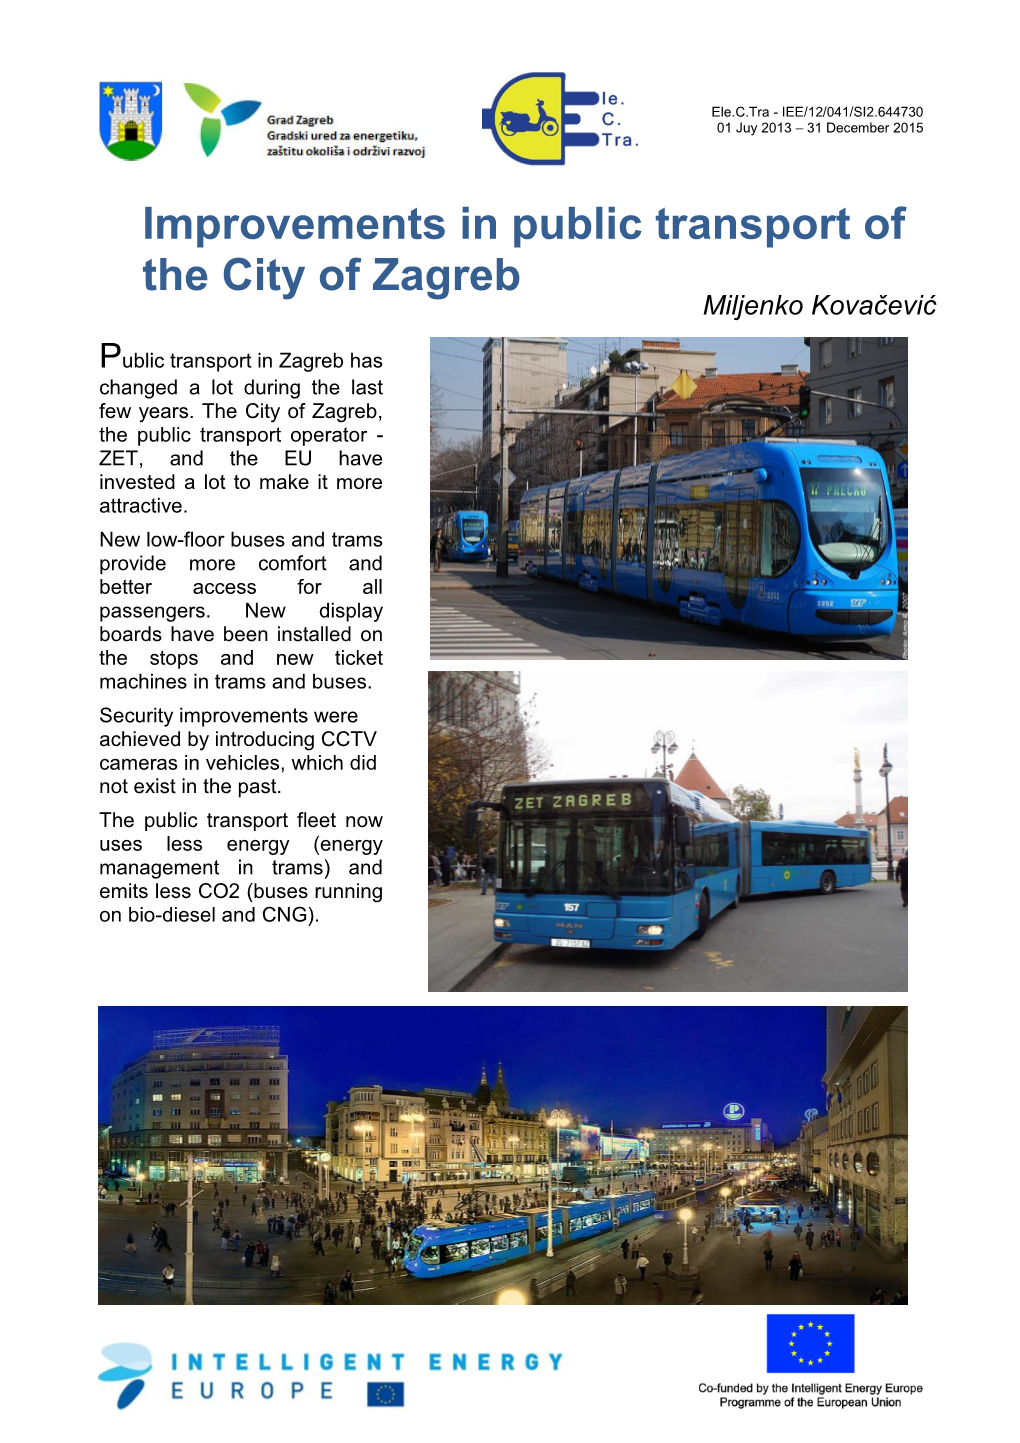 Improvements in Public Transport of the City of Zagreb